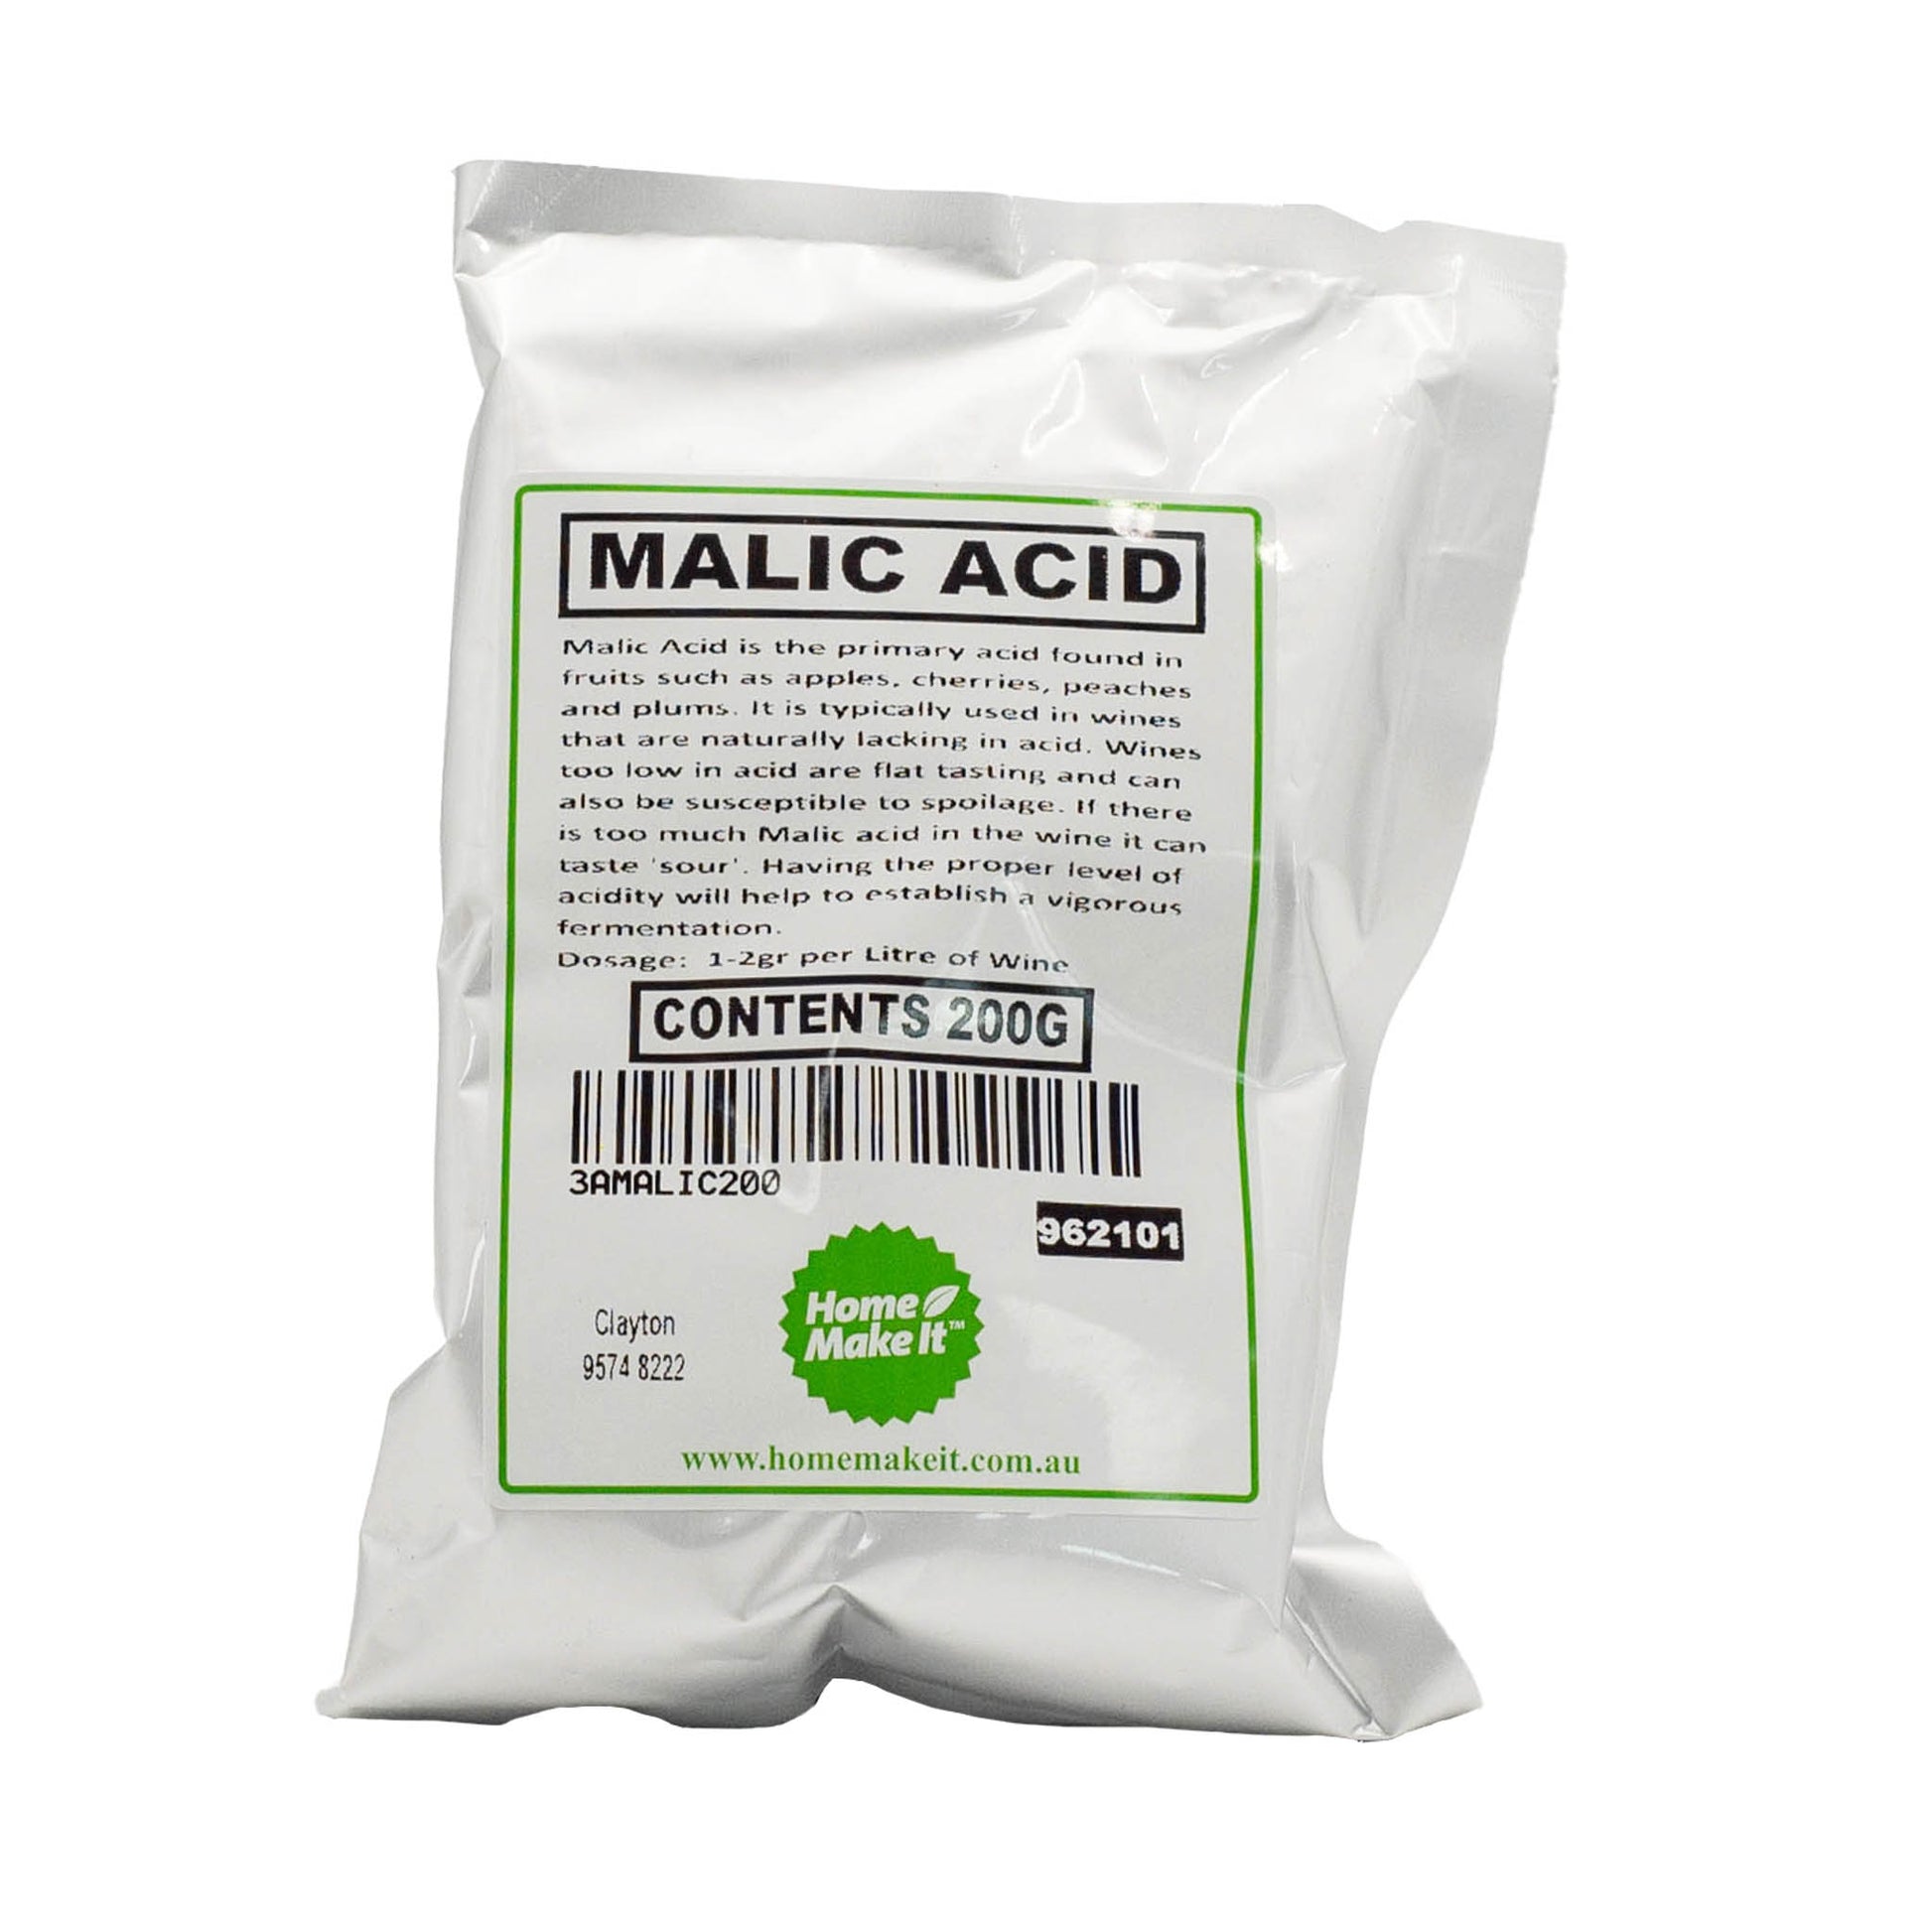 200g bag of malic acid. Used to treat wines with not enough acid. 